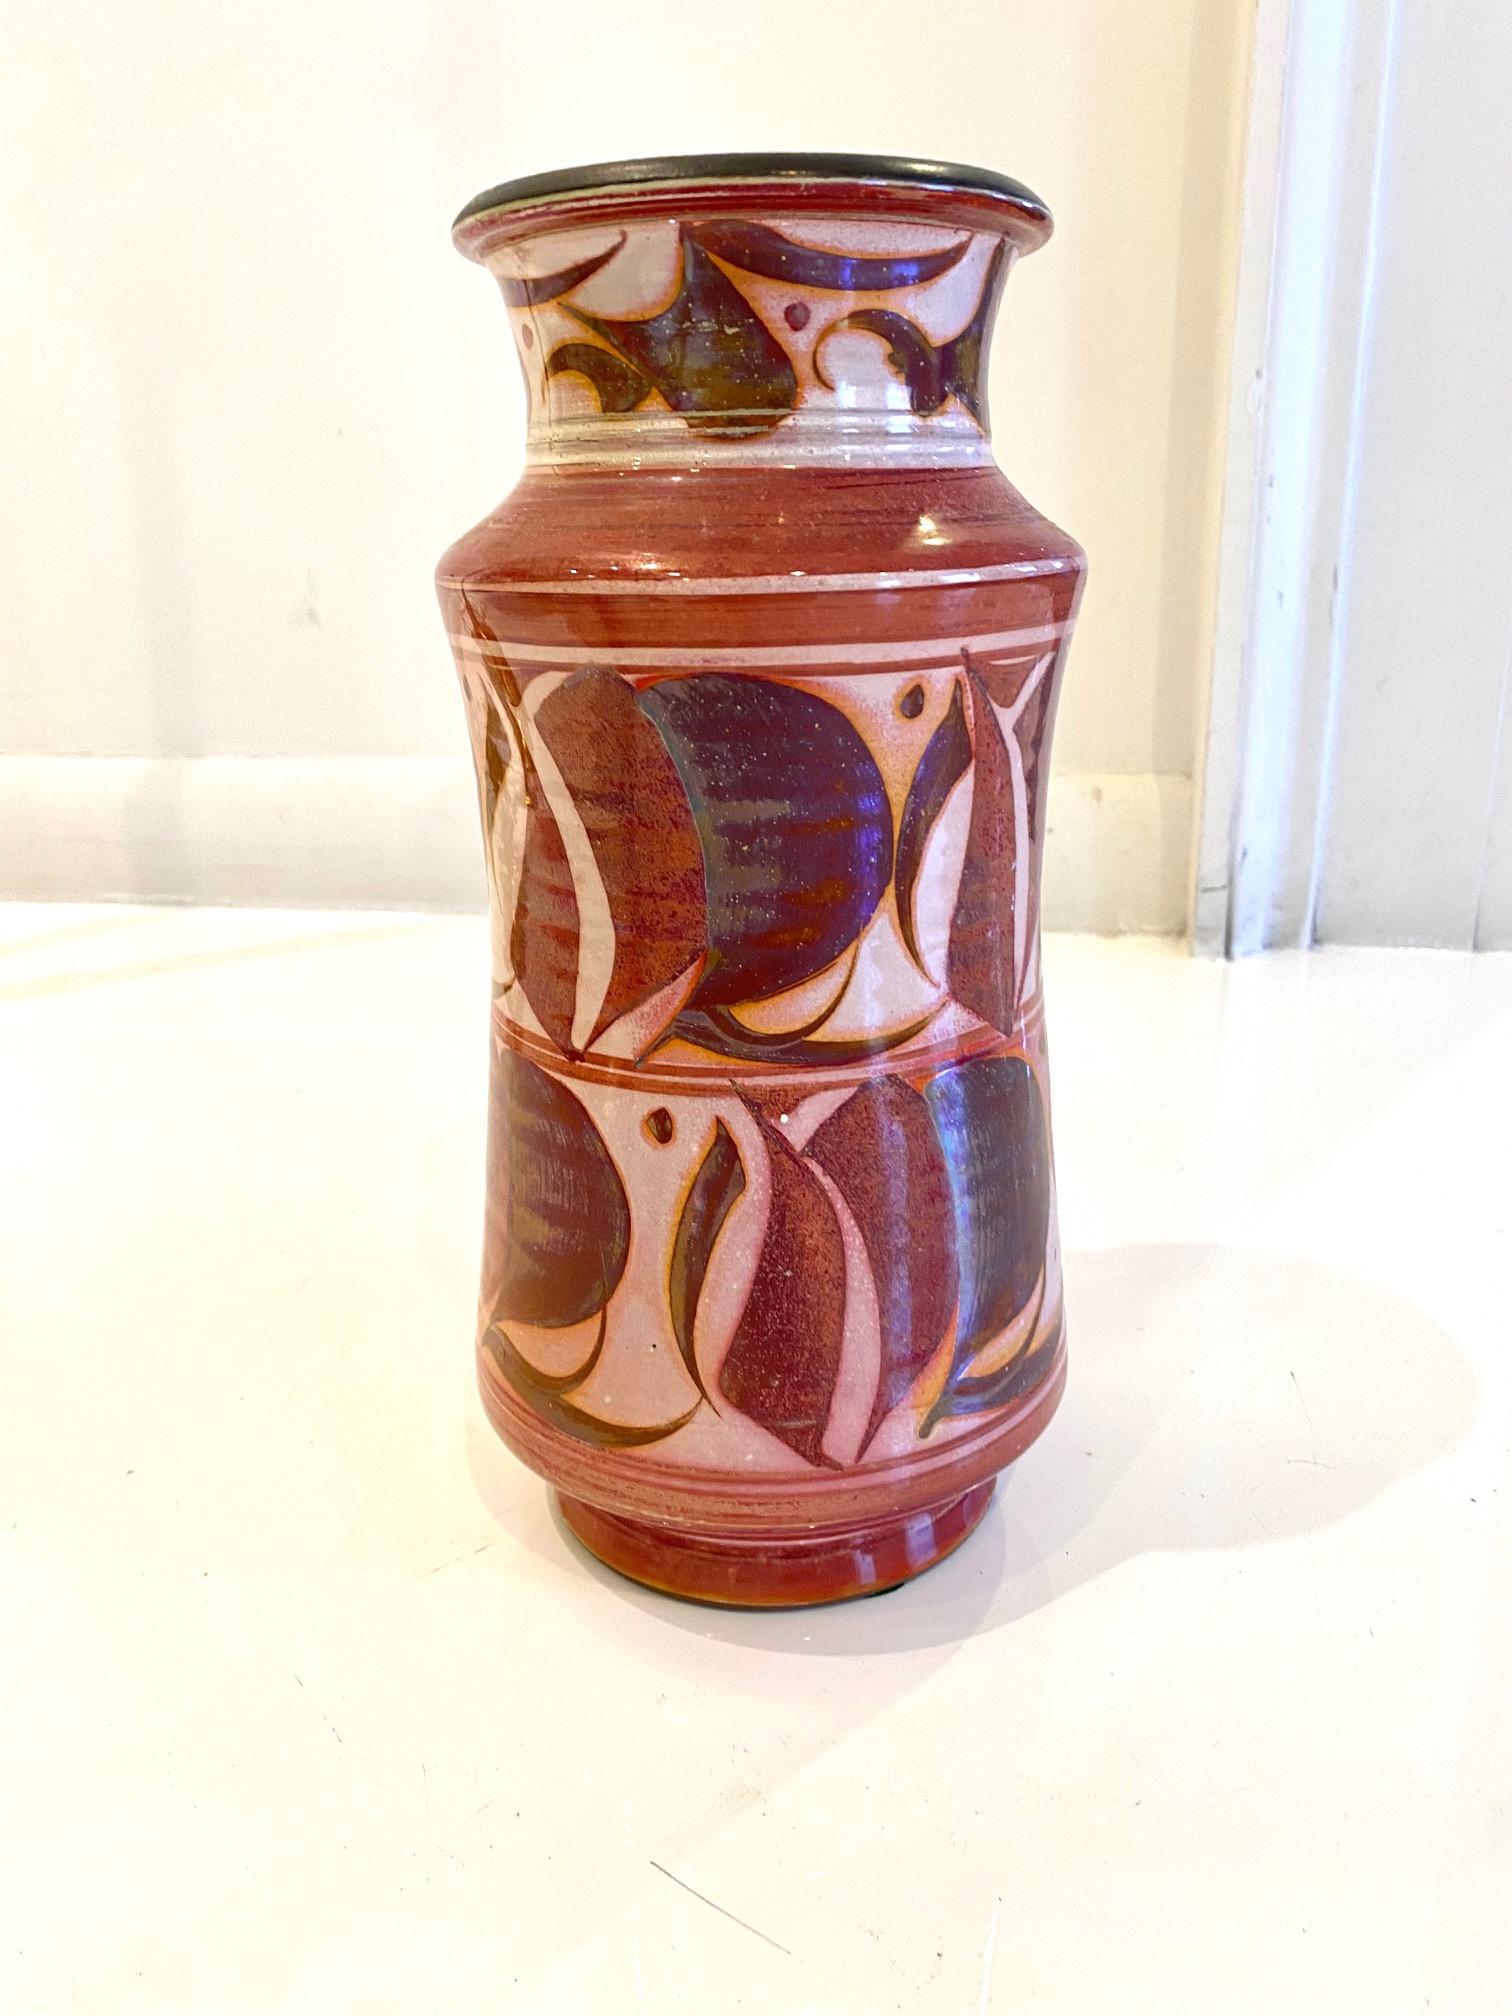 Polychrome Ceramic Vase by Alan Caiger Smith
marked 82.1, 61A England: circa 1980

Alan Caiger-Smith is a ceramicist, painter, and published scholar, best known for his tin-glazed lusterware, hand-decorated with distinctive calligraphic brushwork